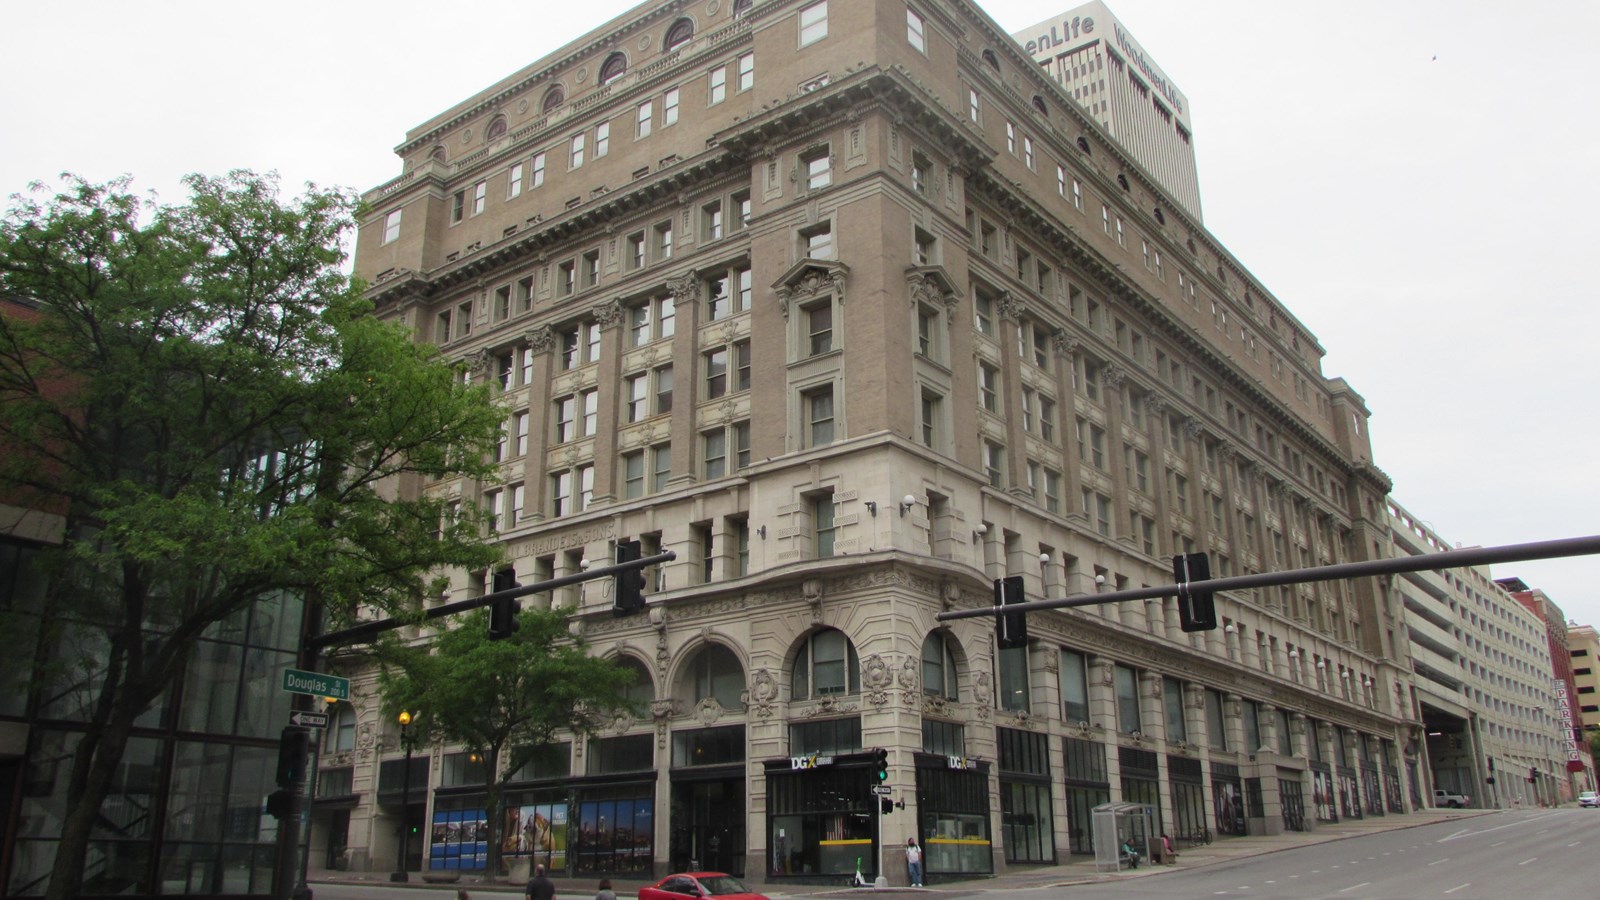 Eight story, Second Renaissance Revival building on downtown corner lot. First floor storefronts